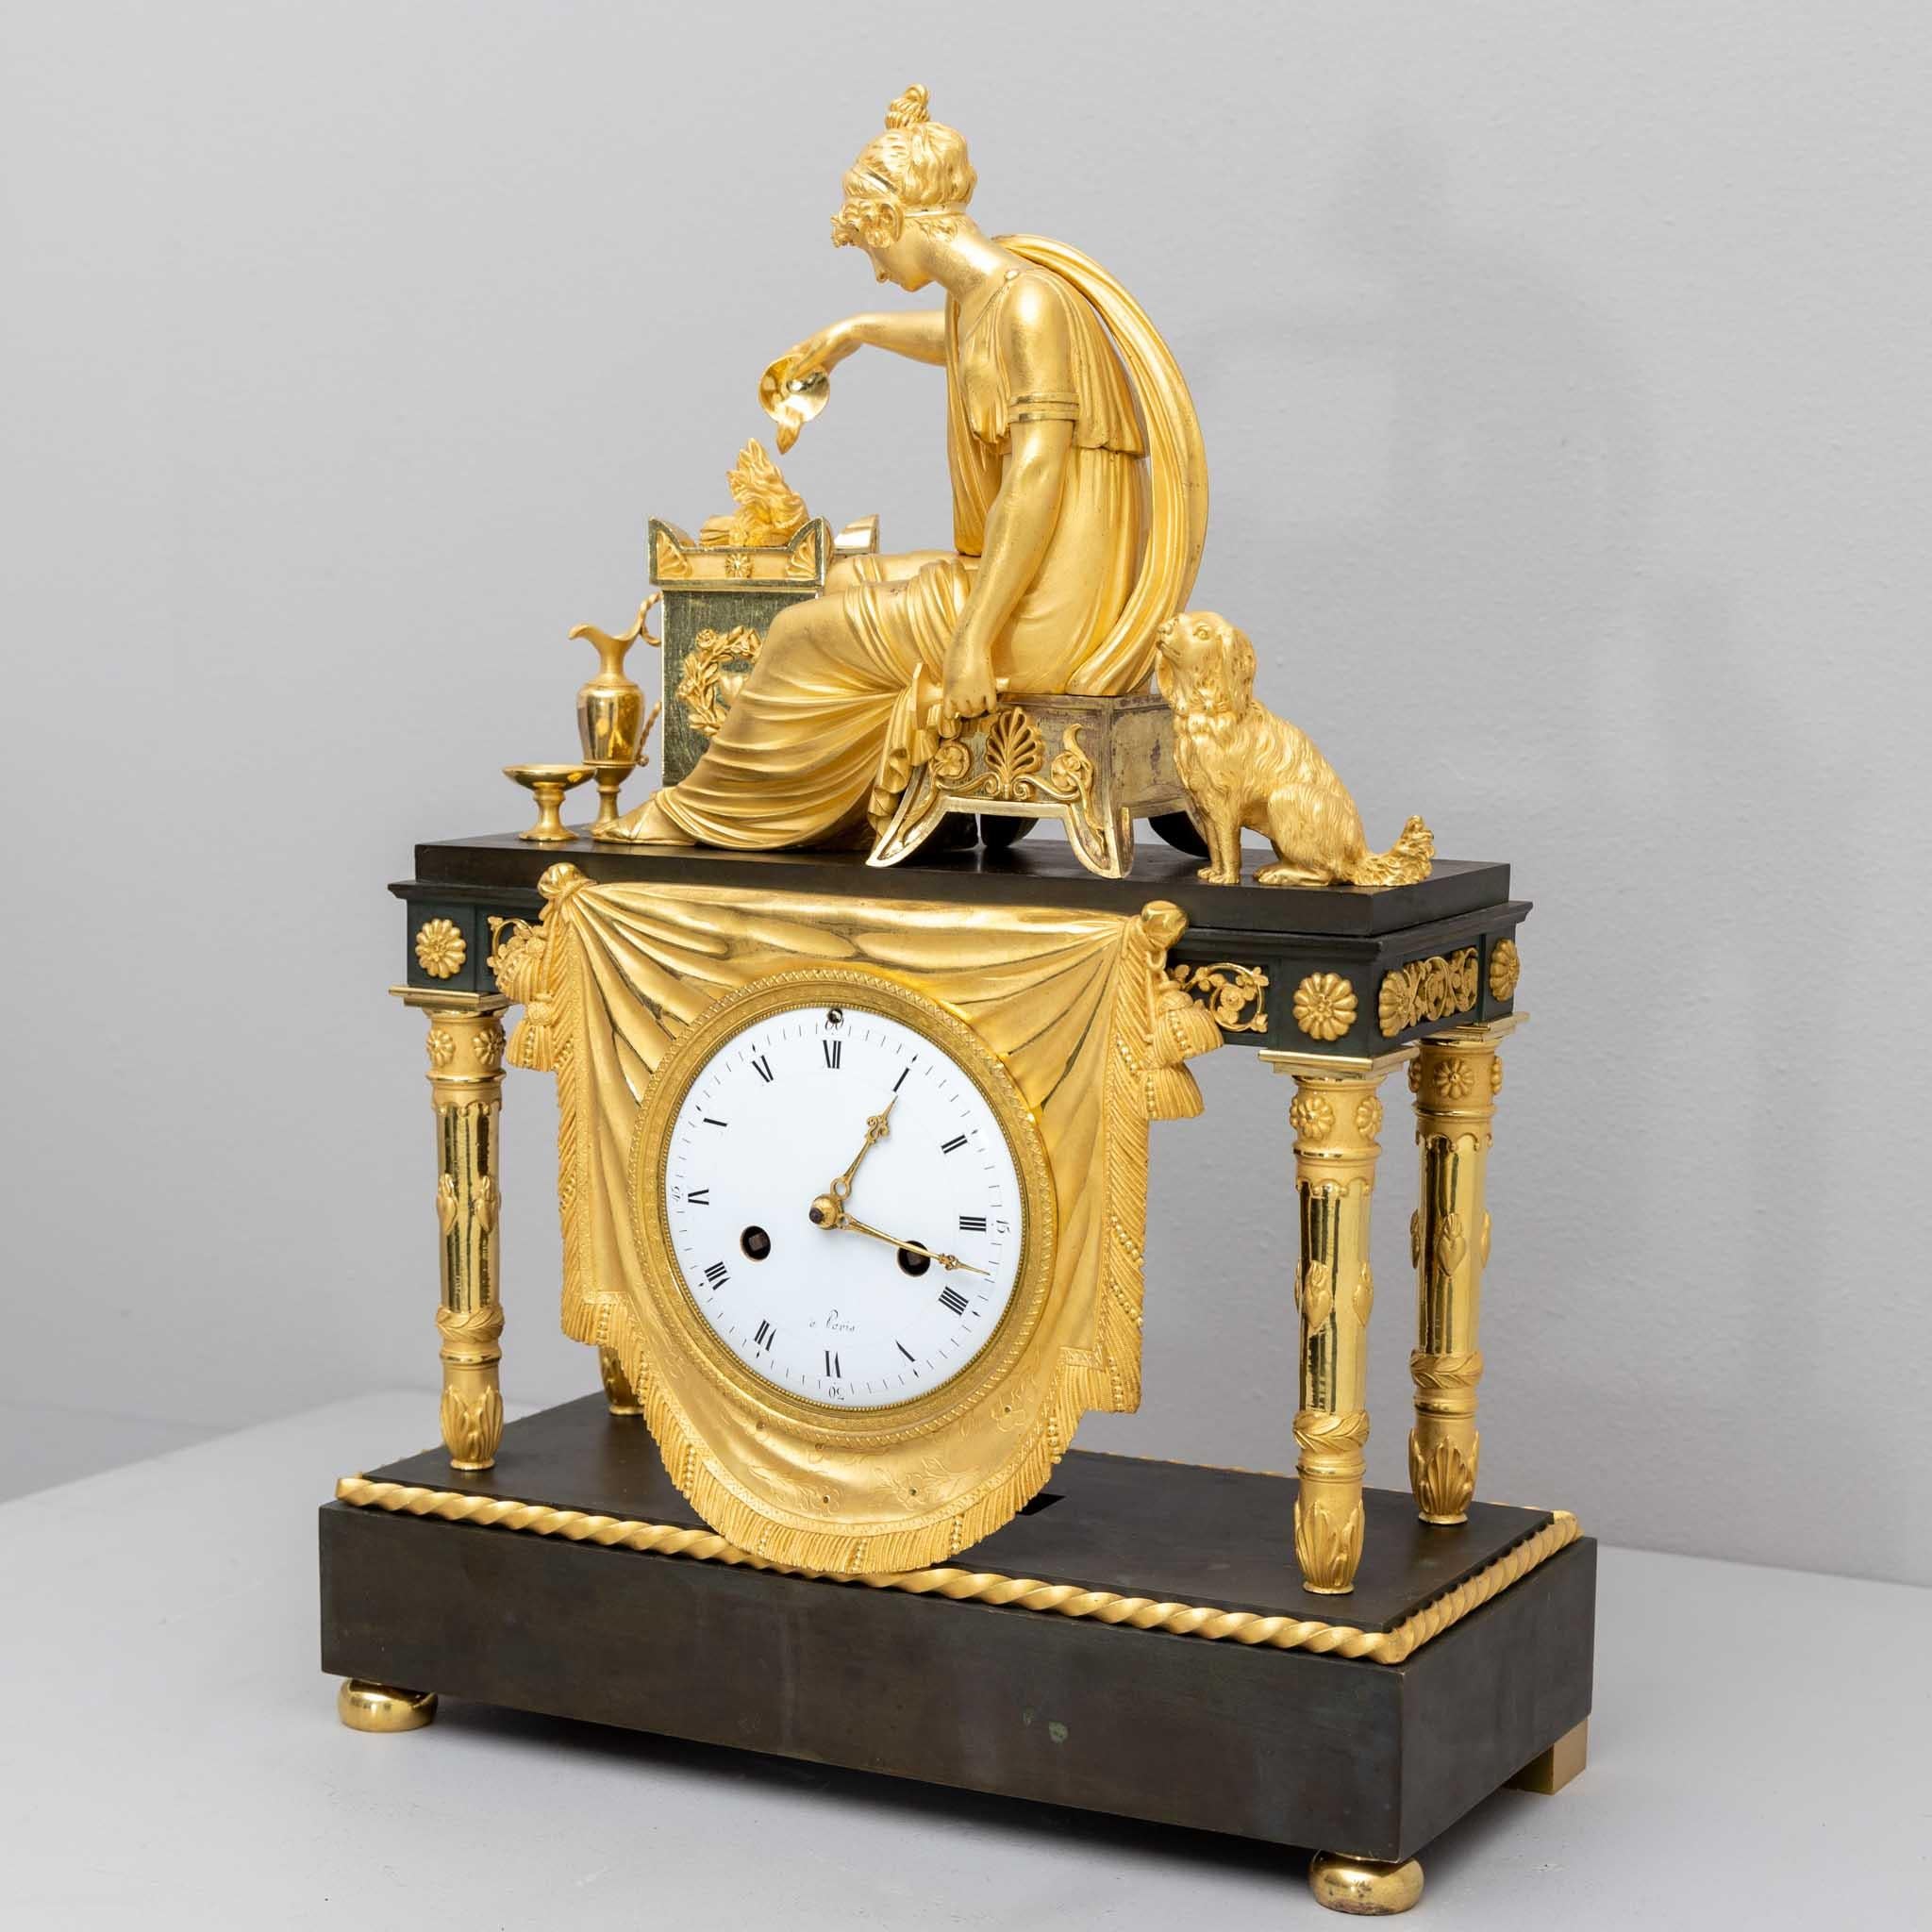 French mantel clock made of burnished and fire-gilded bronze with an enamelled dial, there inscribed 